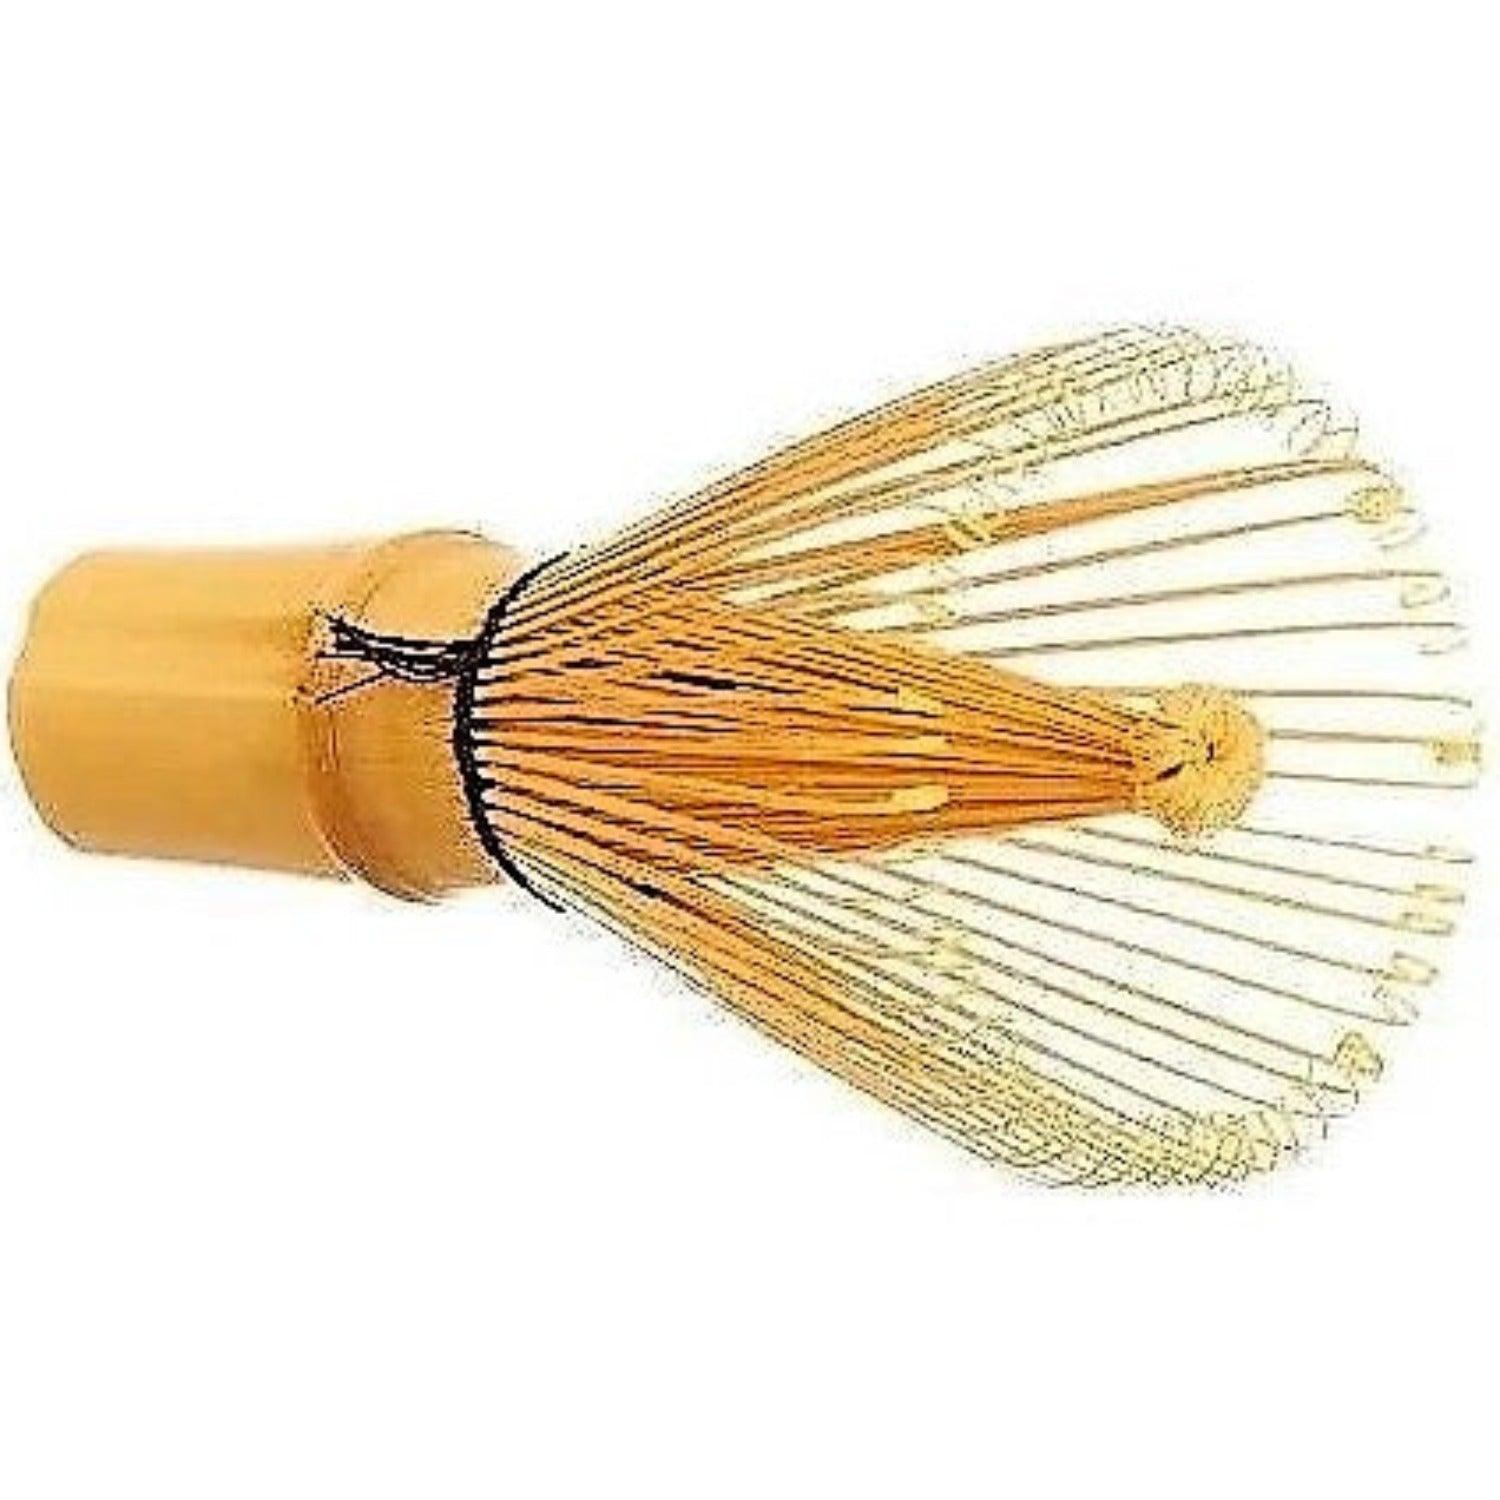 DoM Bamboo Whisk Food Items at Village Vitamin Store